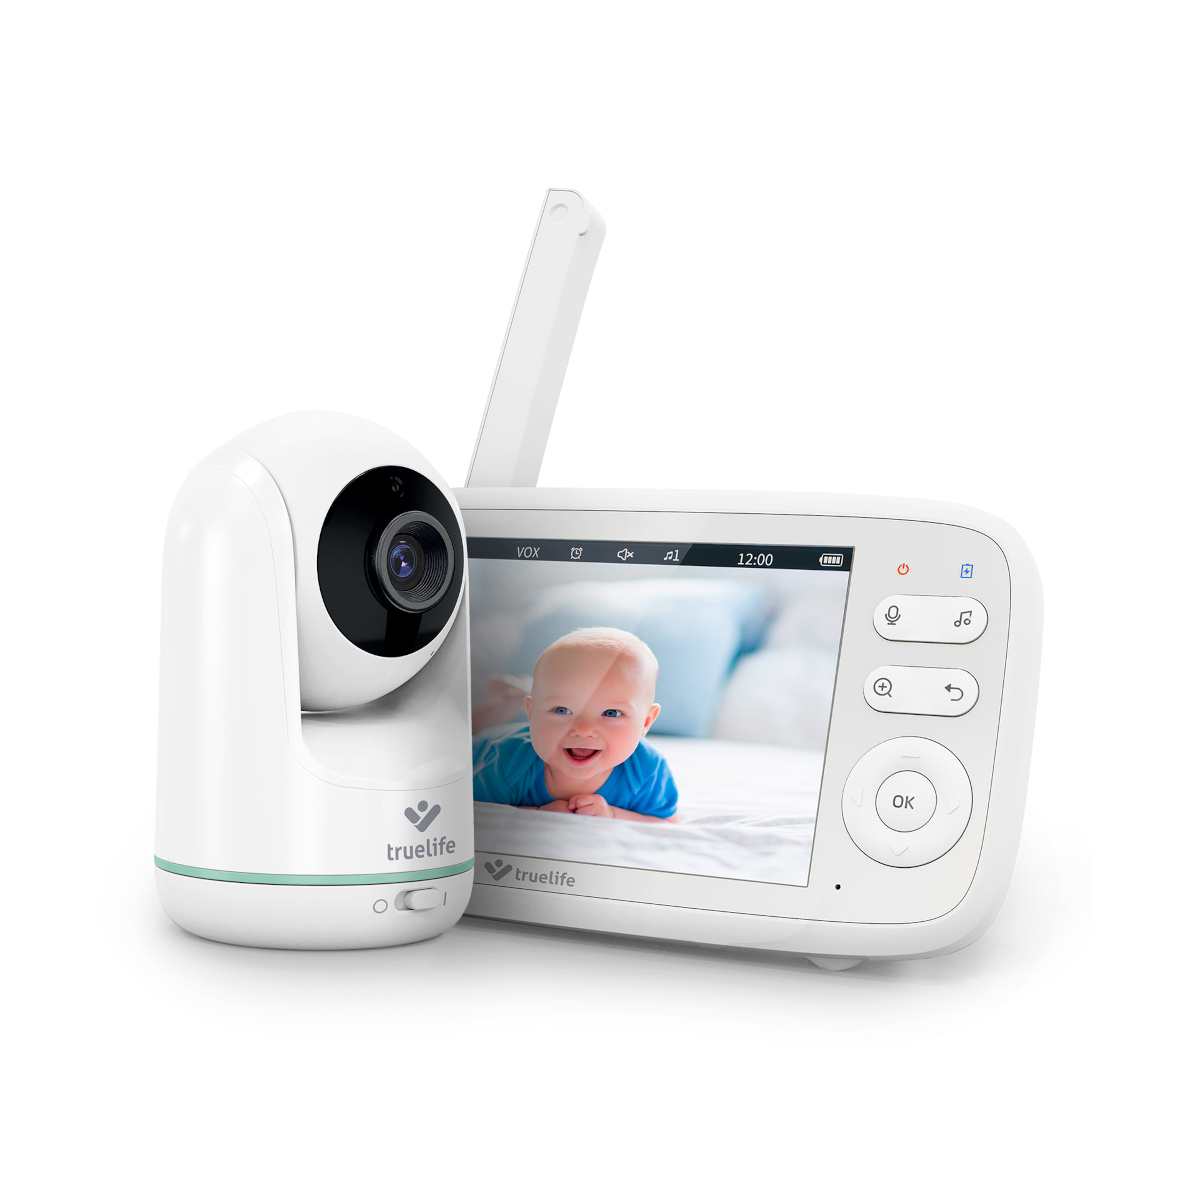 TrueLife NannyCam R5 – The rotating baby monitor that doesn't miss a thing